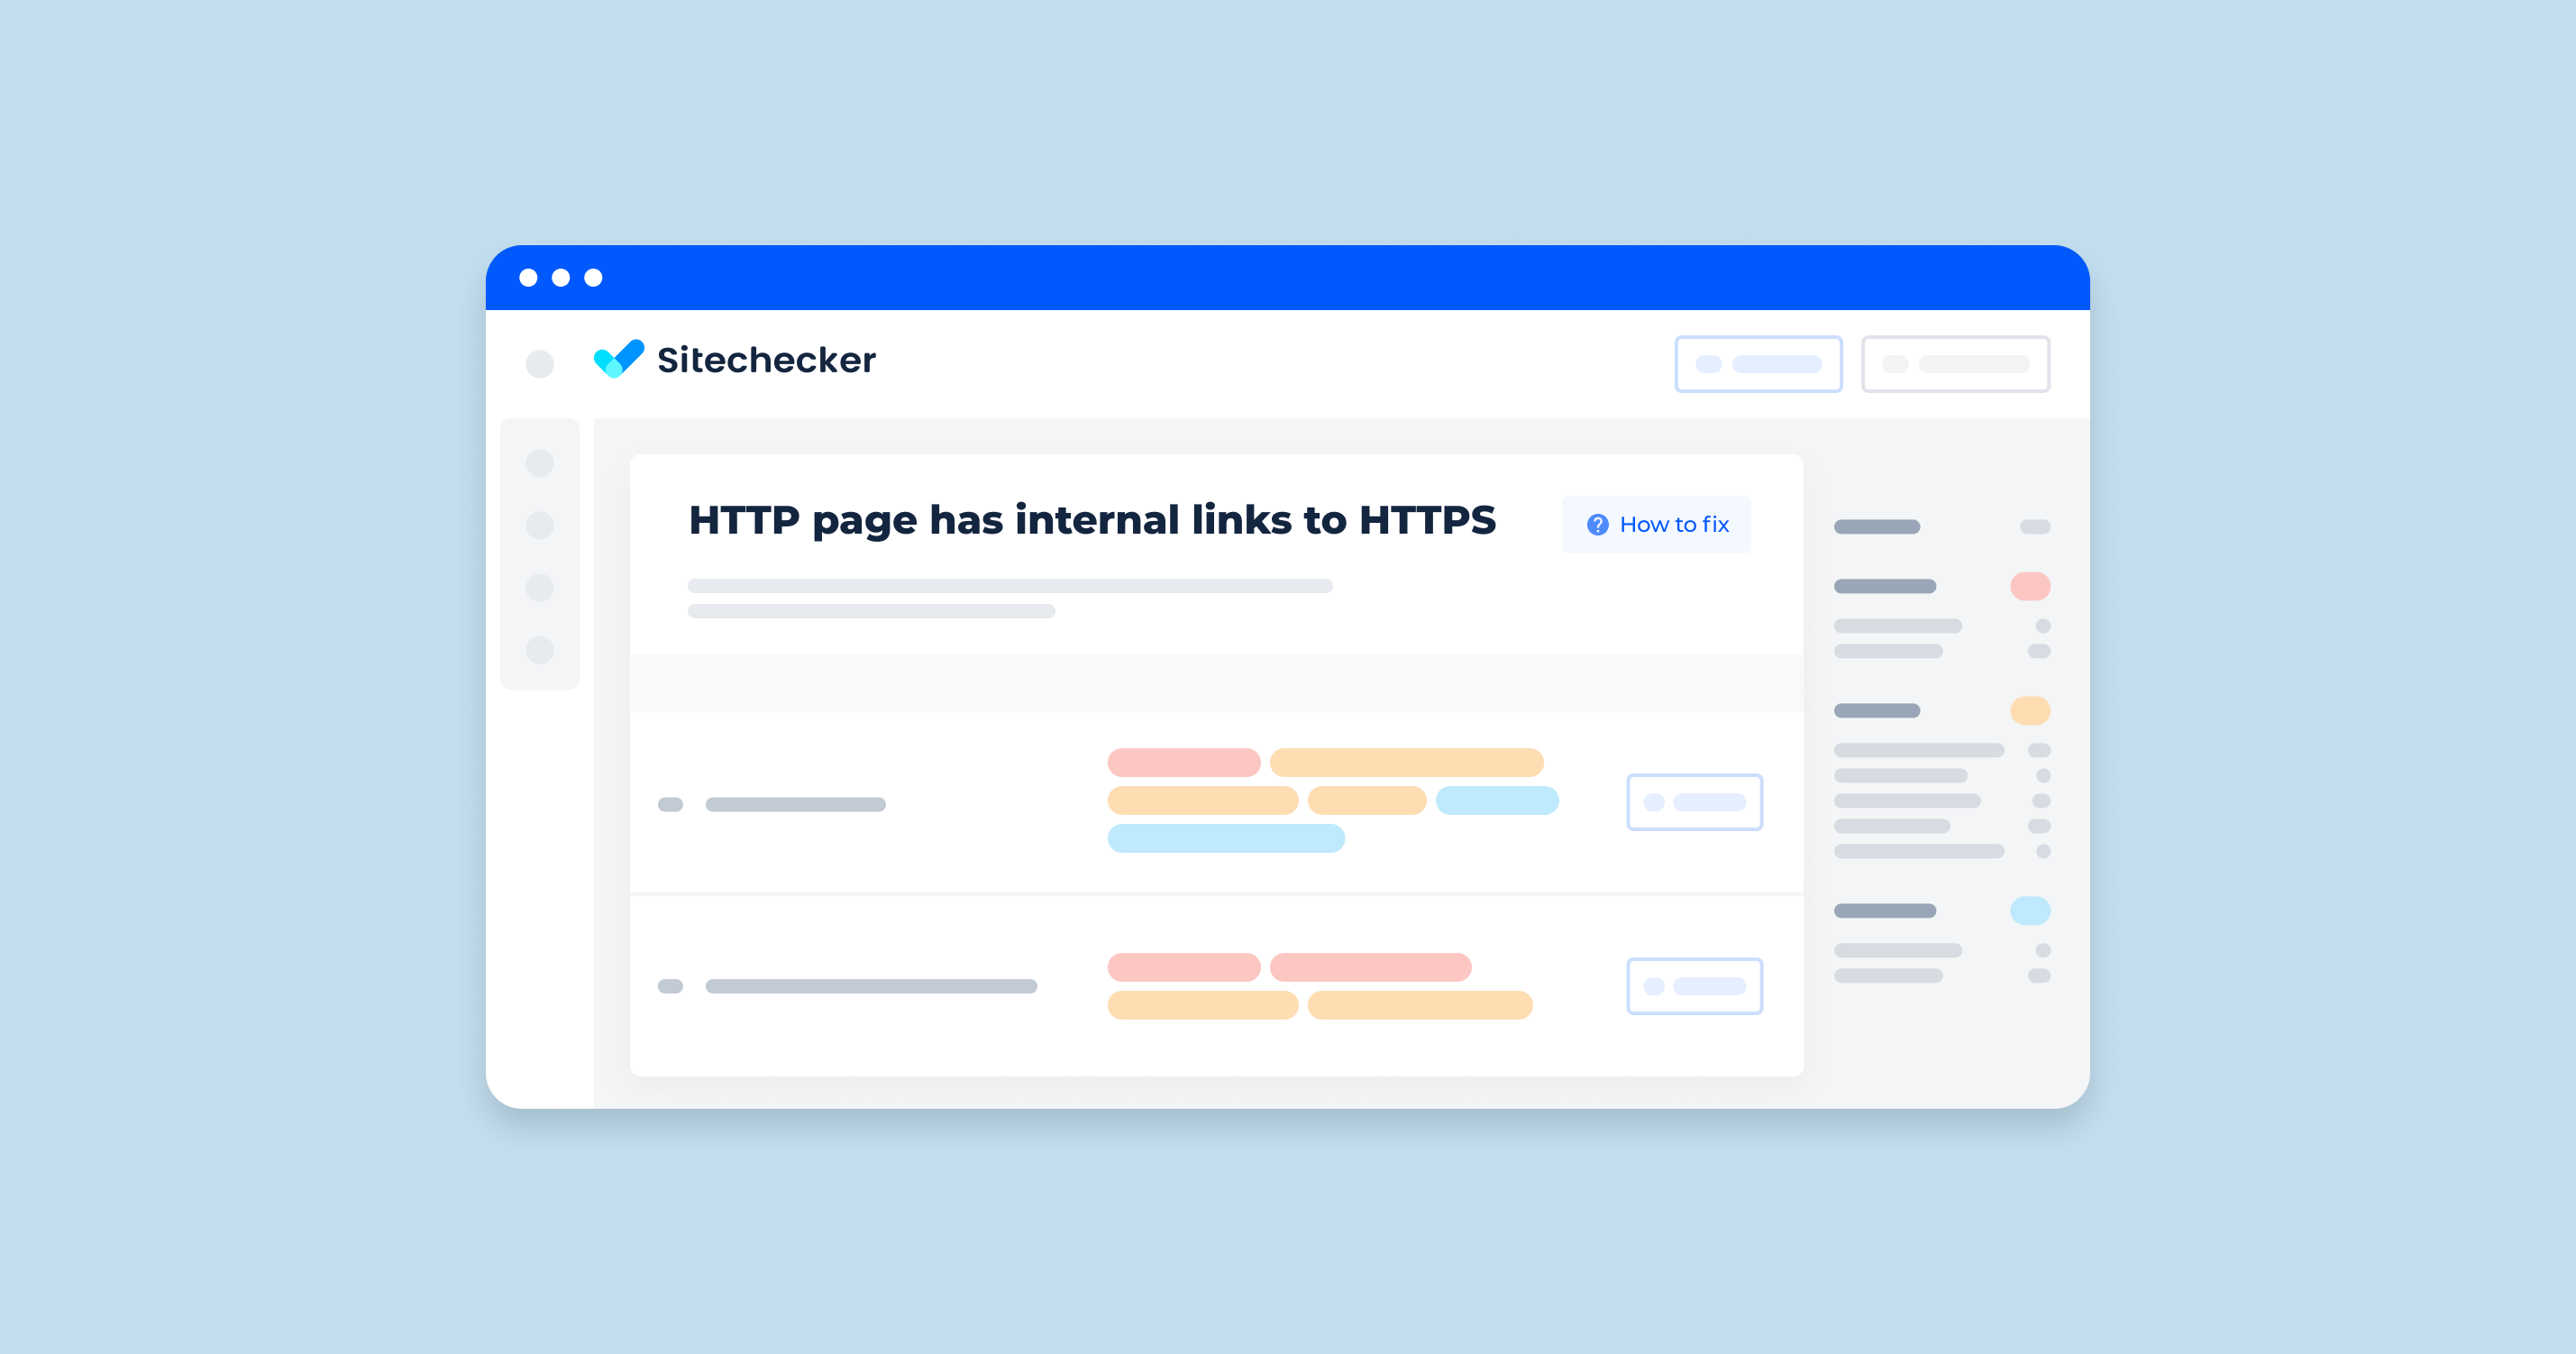 How to Fix the Issue When HTTP Page Has Internal Links to HTTPS